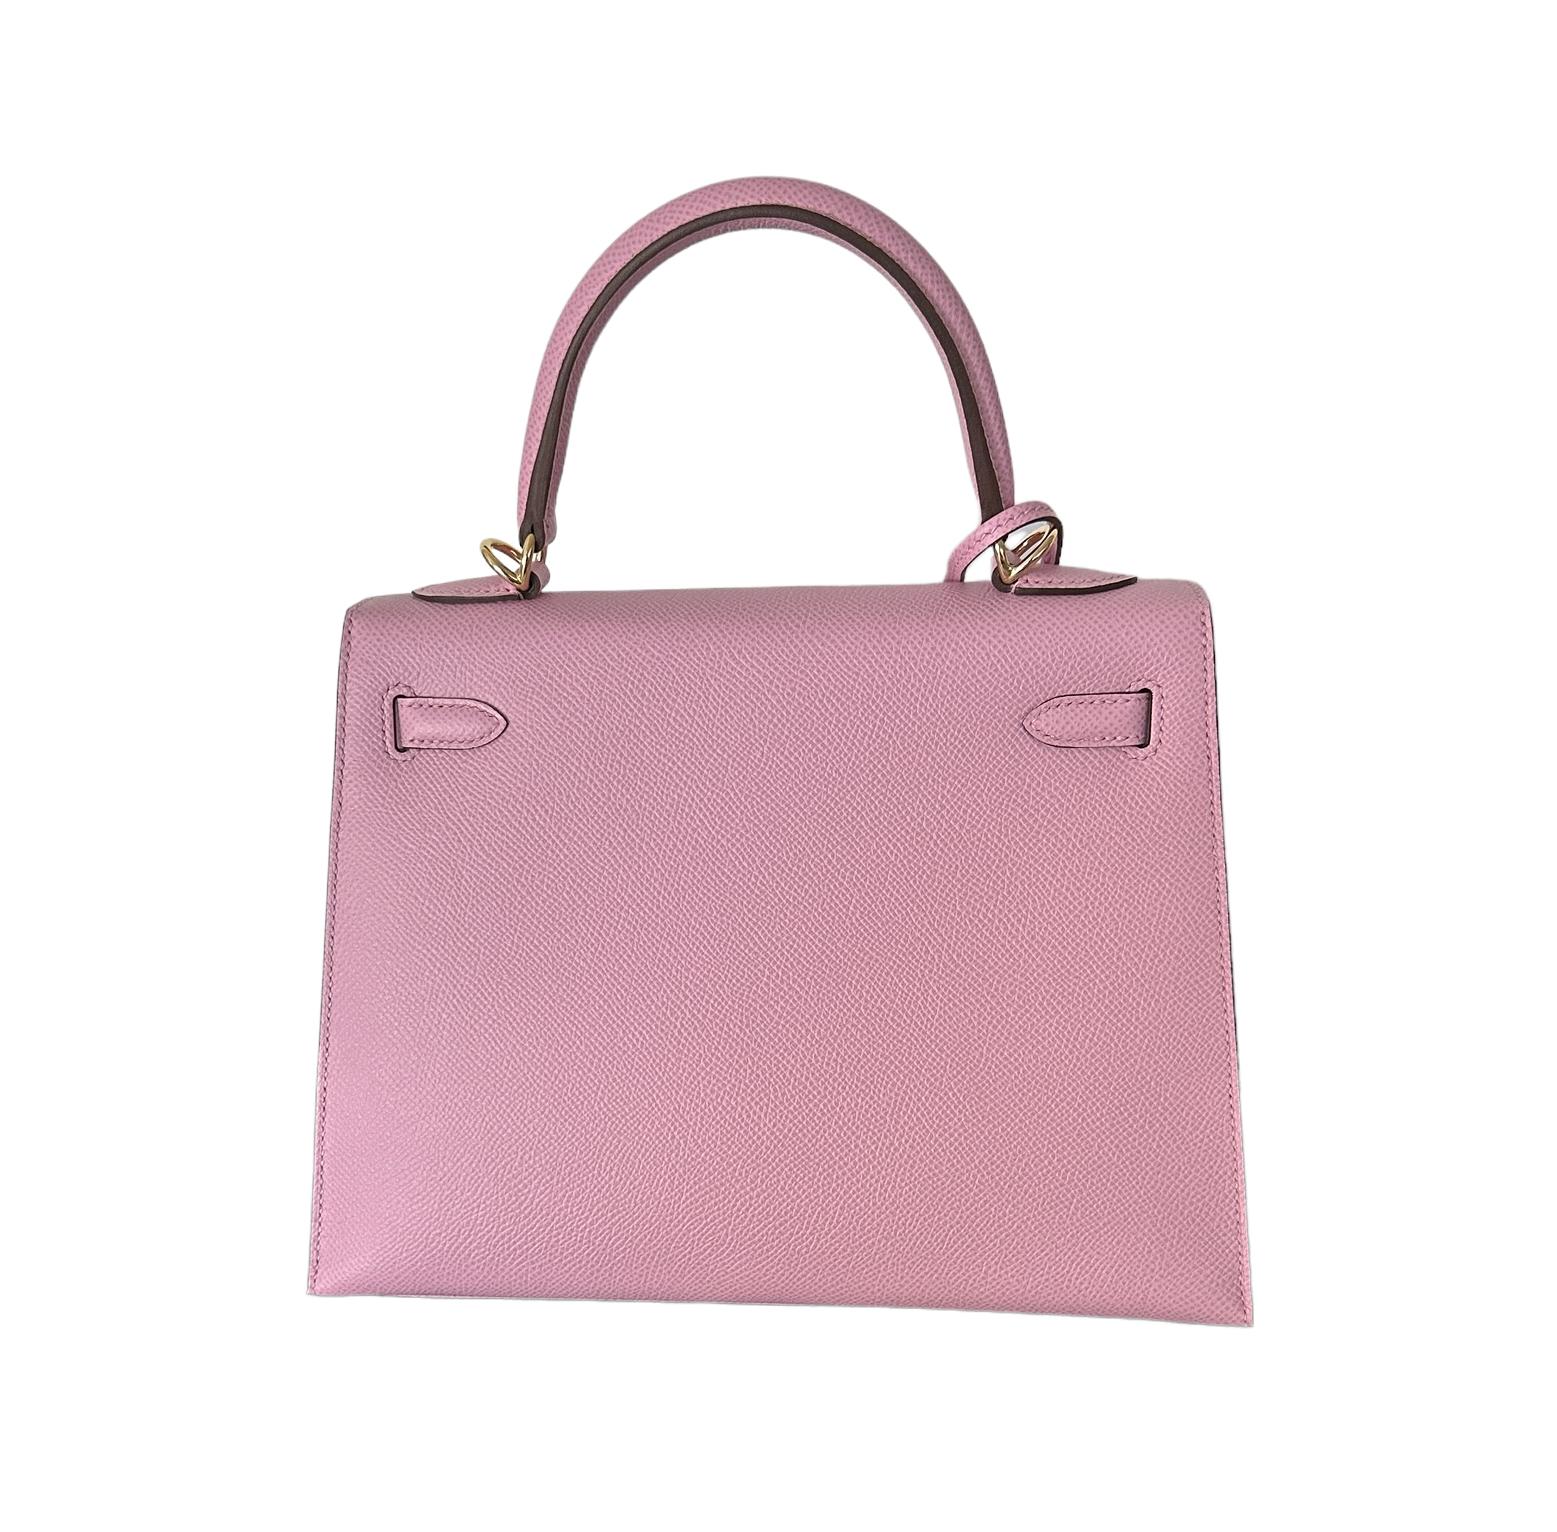 Hermes
Kelly 25cm Sellier
Mauve Sylvestre with Lime Interior
Special VIP Order, with Horseshoe Stamp
Epsom leather
Mauve Sylvestre exterior
Lime interior
Top handle with removable shoulder strap
Perma Brass Hardware, which actually looks almost rose